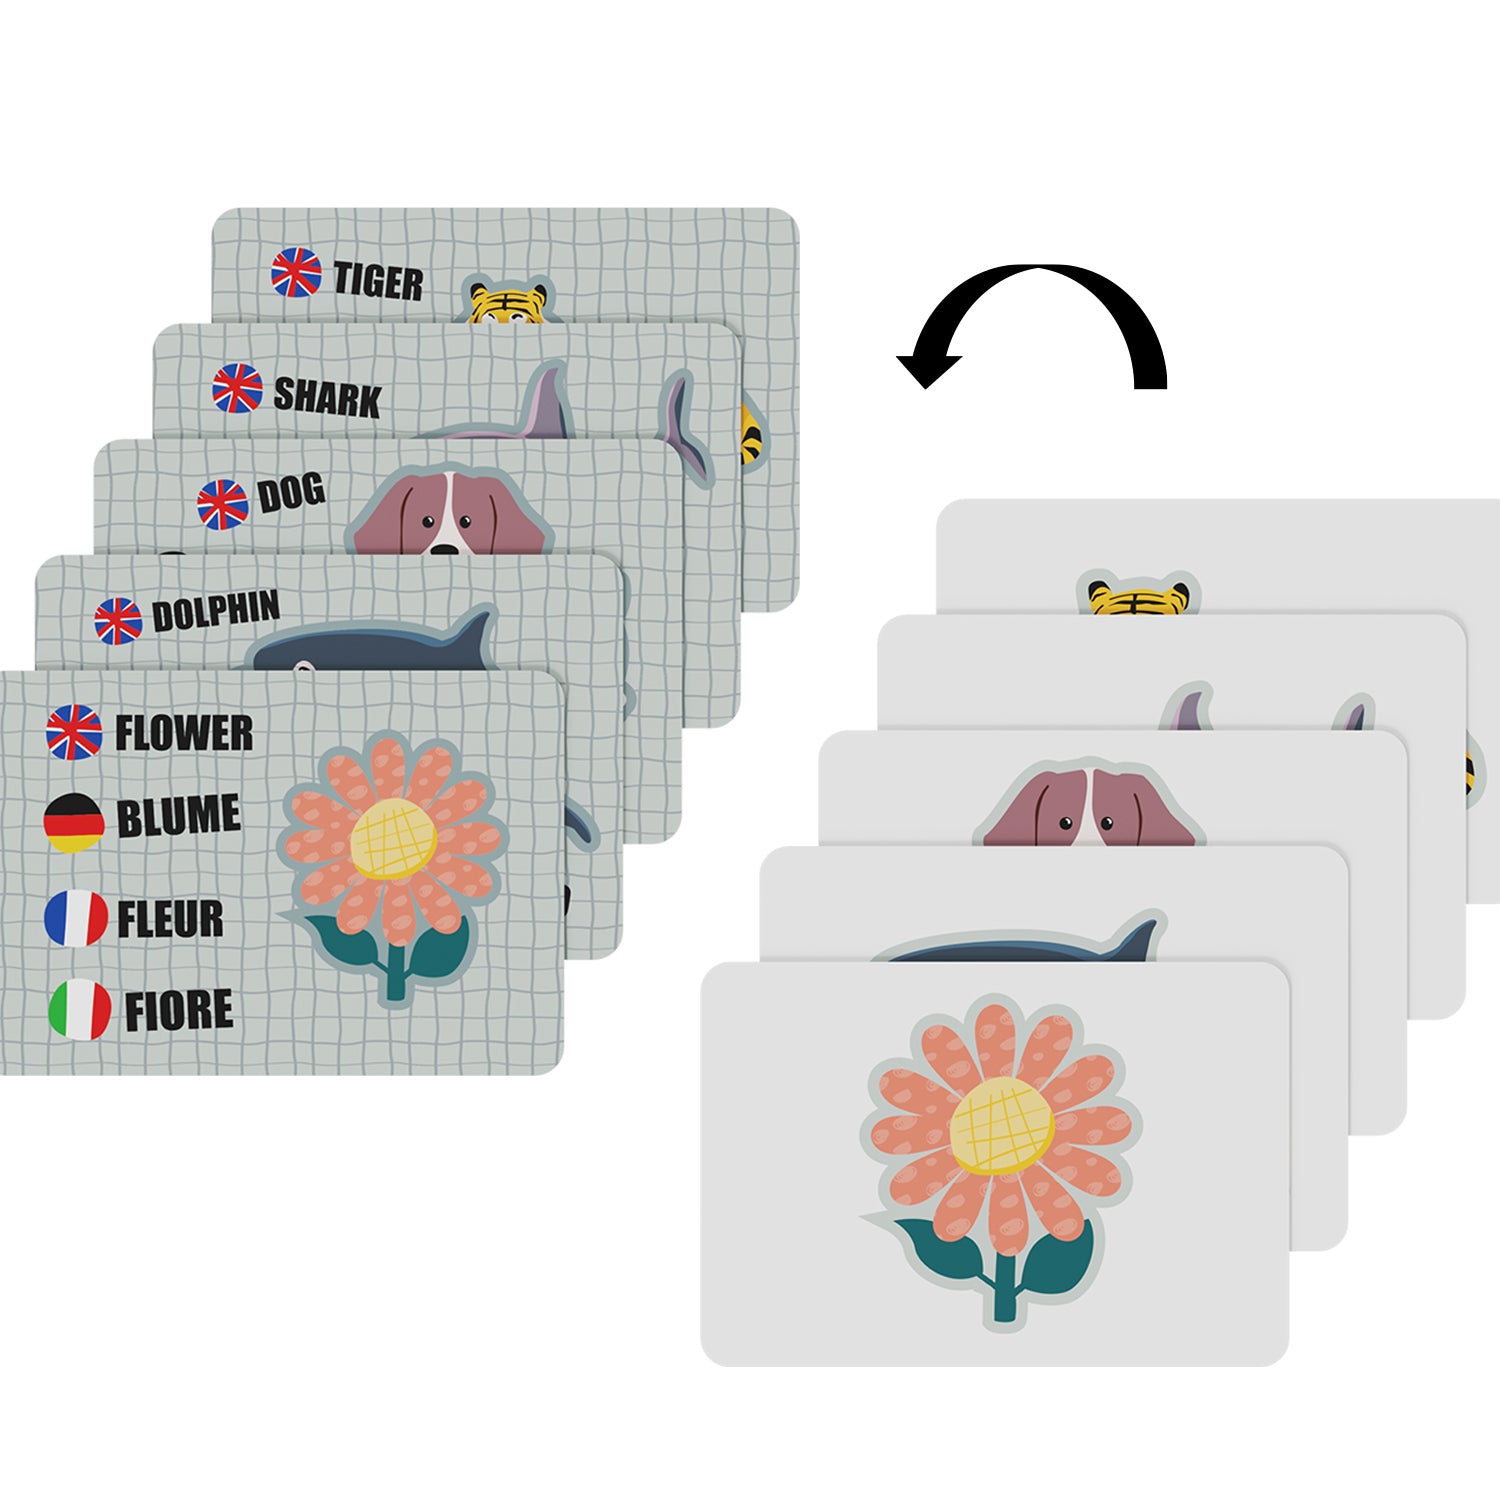 With the included word cards, older kids practise spelling and learn words.